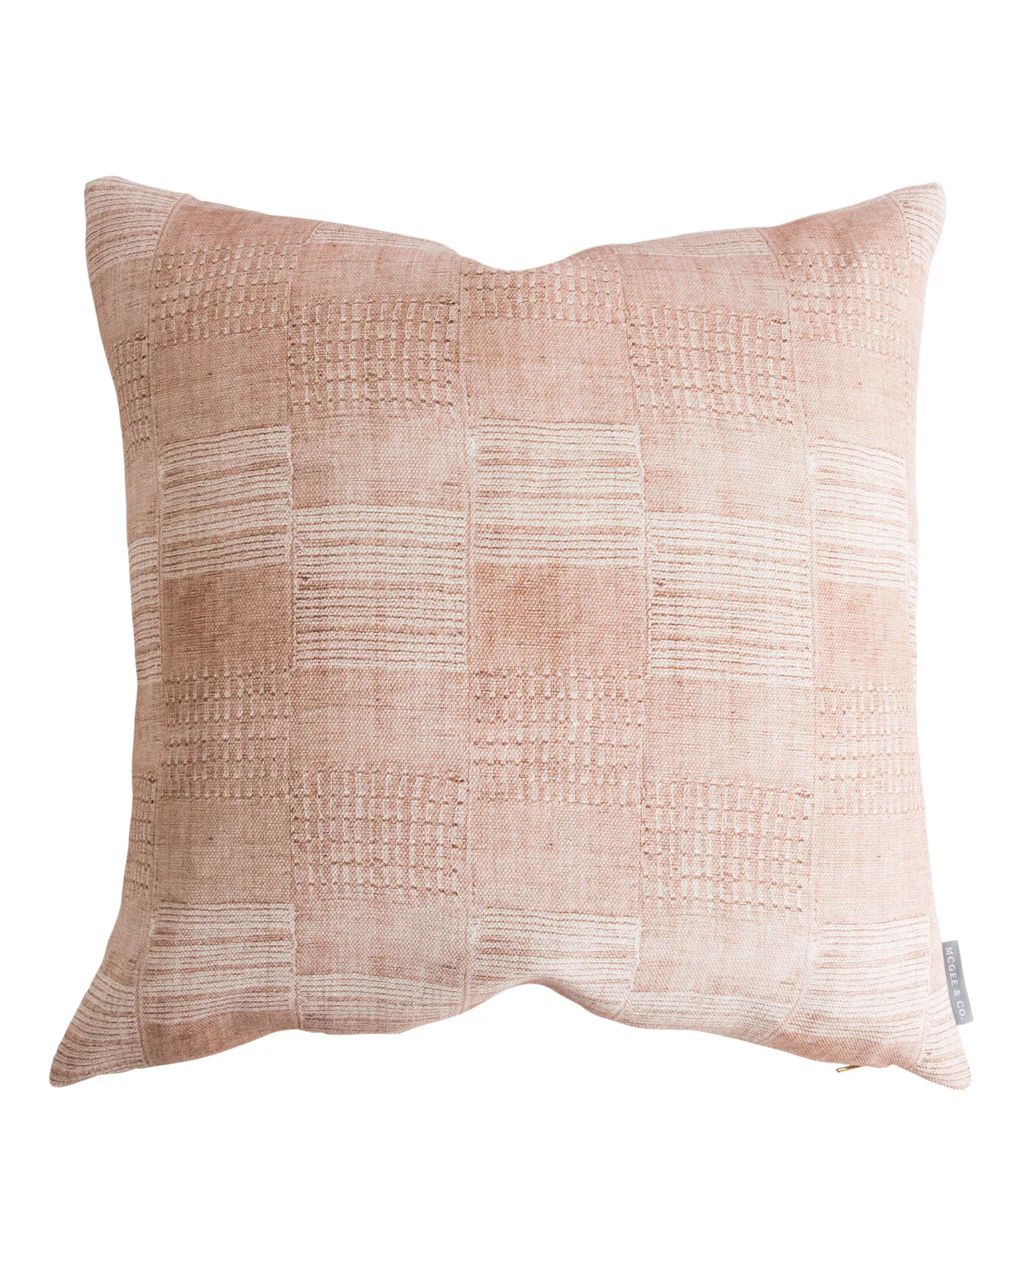 Ruby Pillow Cover | McGee & Co.